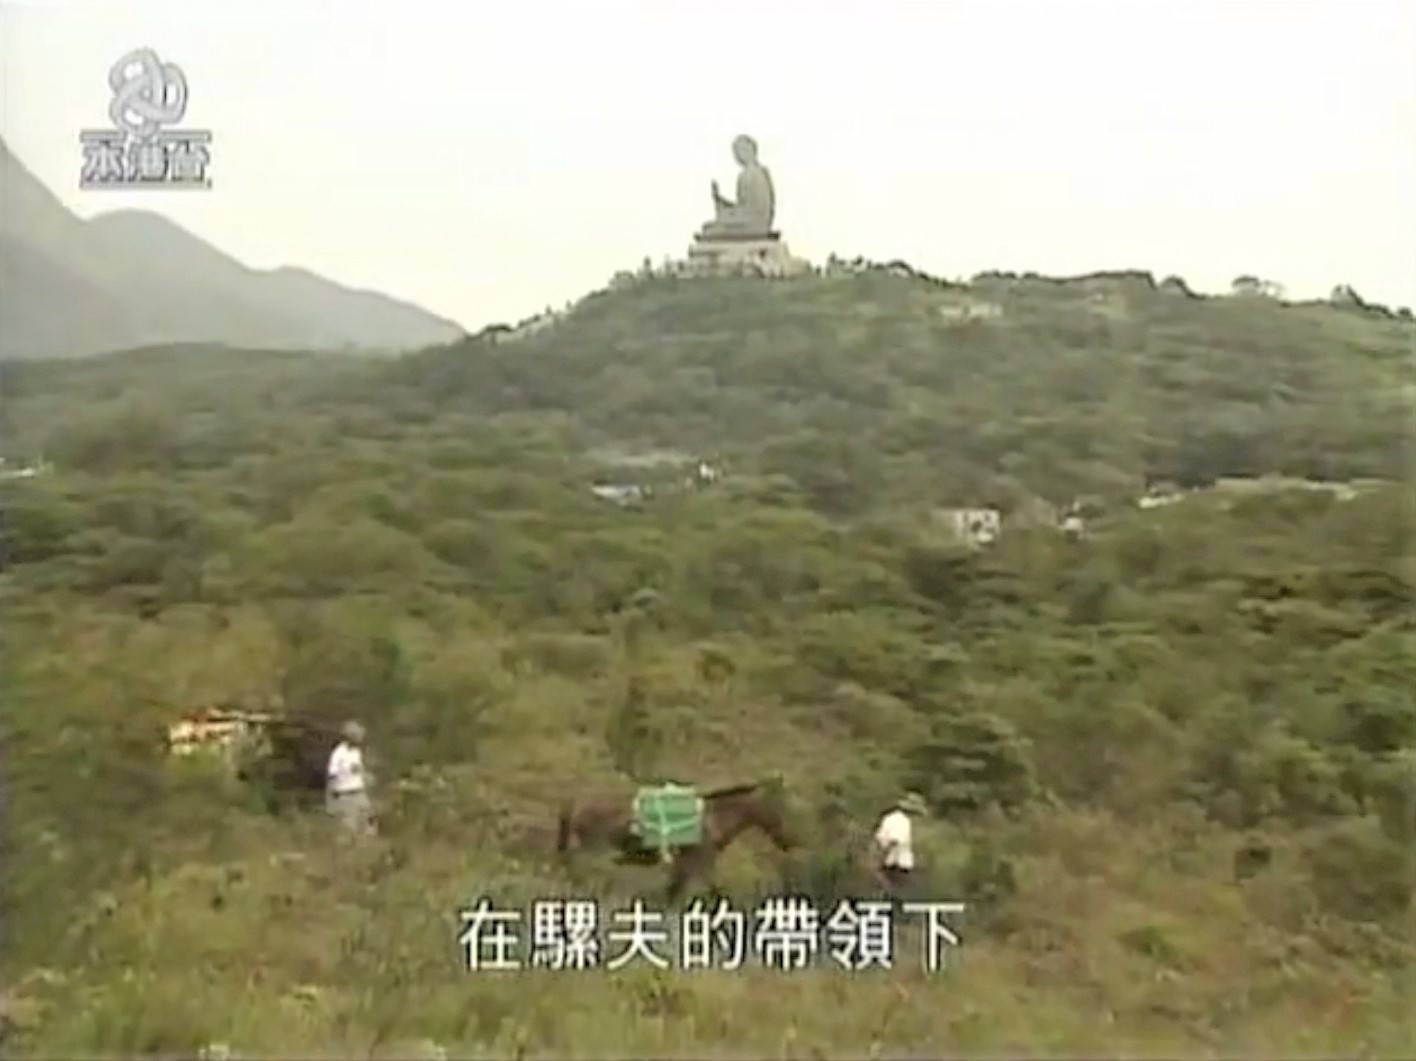 Mules and workers delivered the building materials to construction site of Ngong Ping 360 near Big Buddha in 2004.